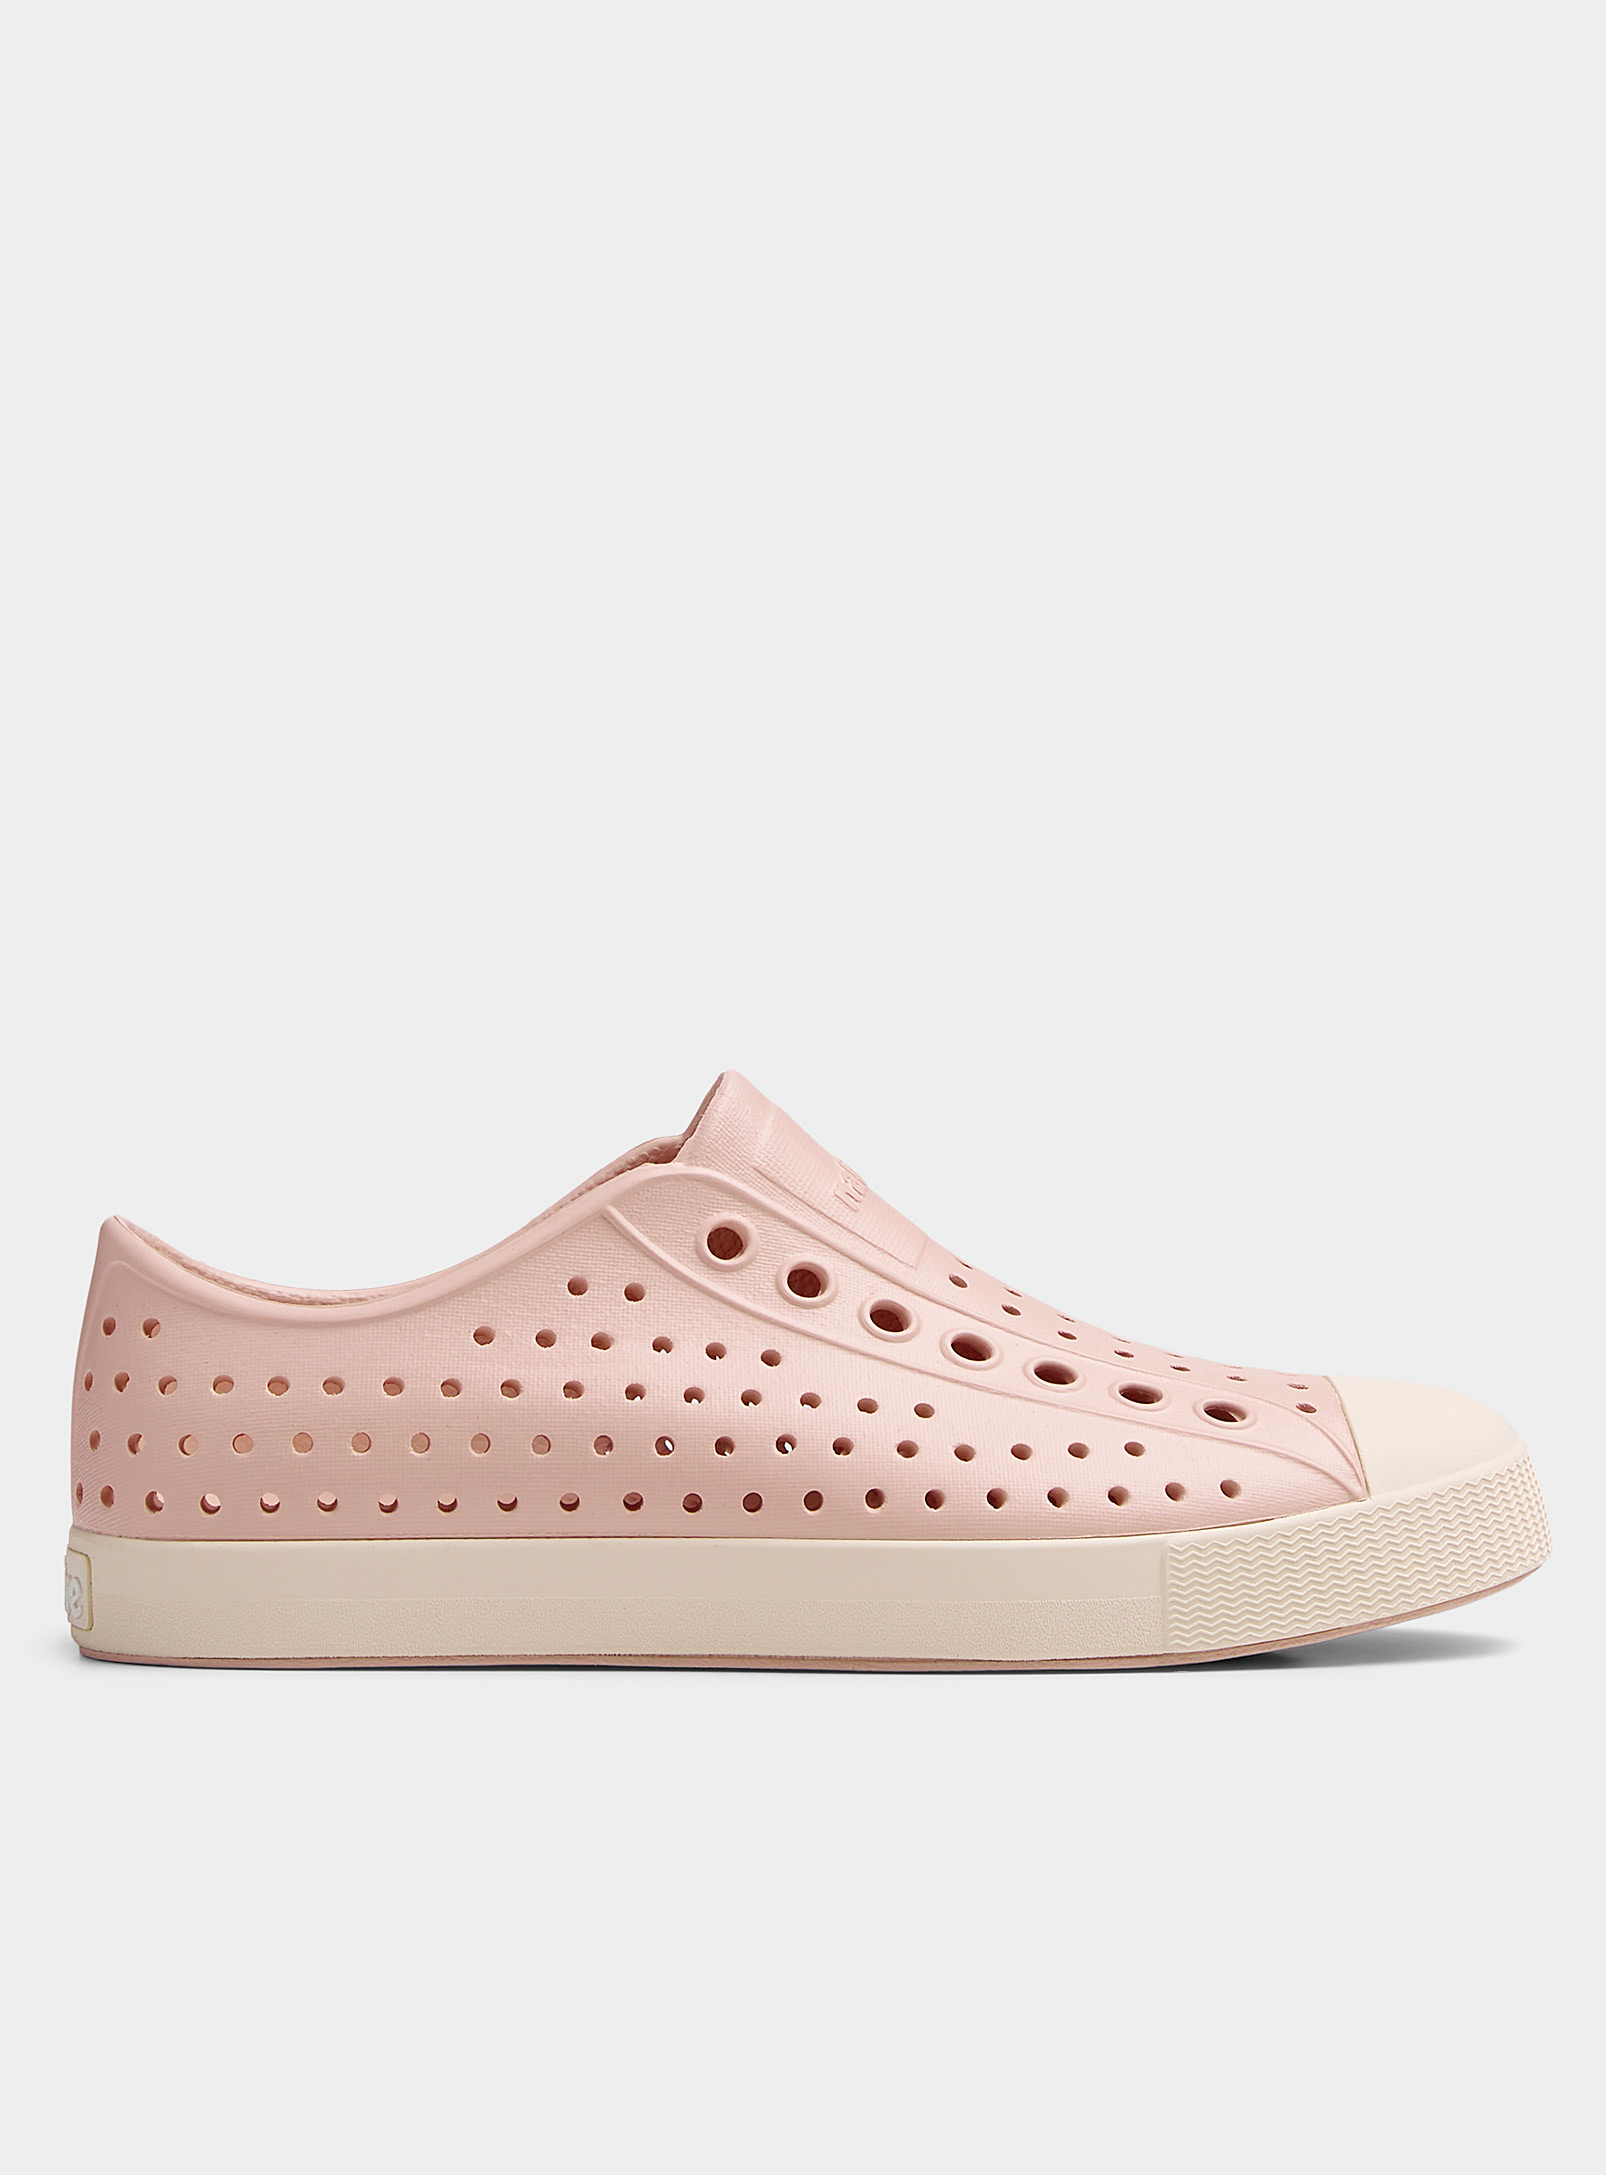 Native Jefferson Pink Perforated Shoes Women In Dusky Pink